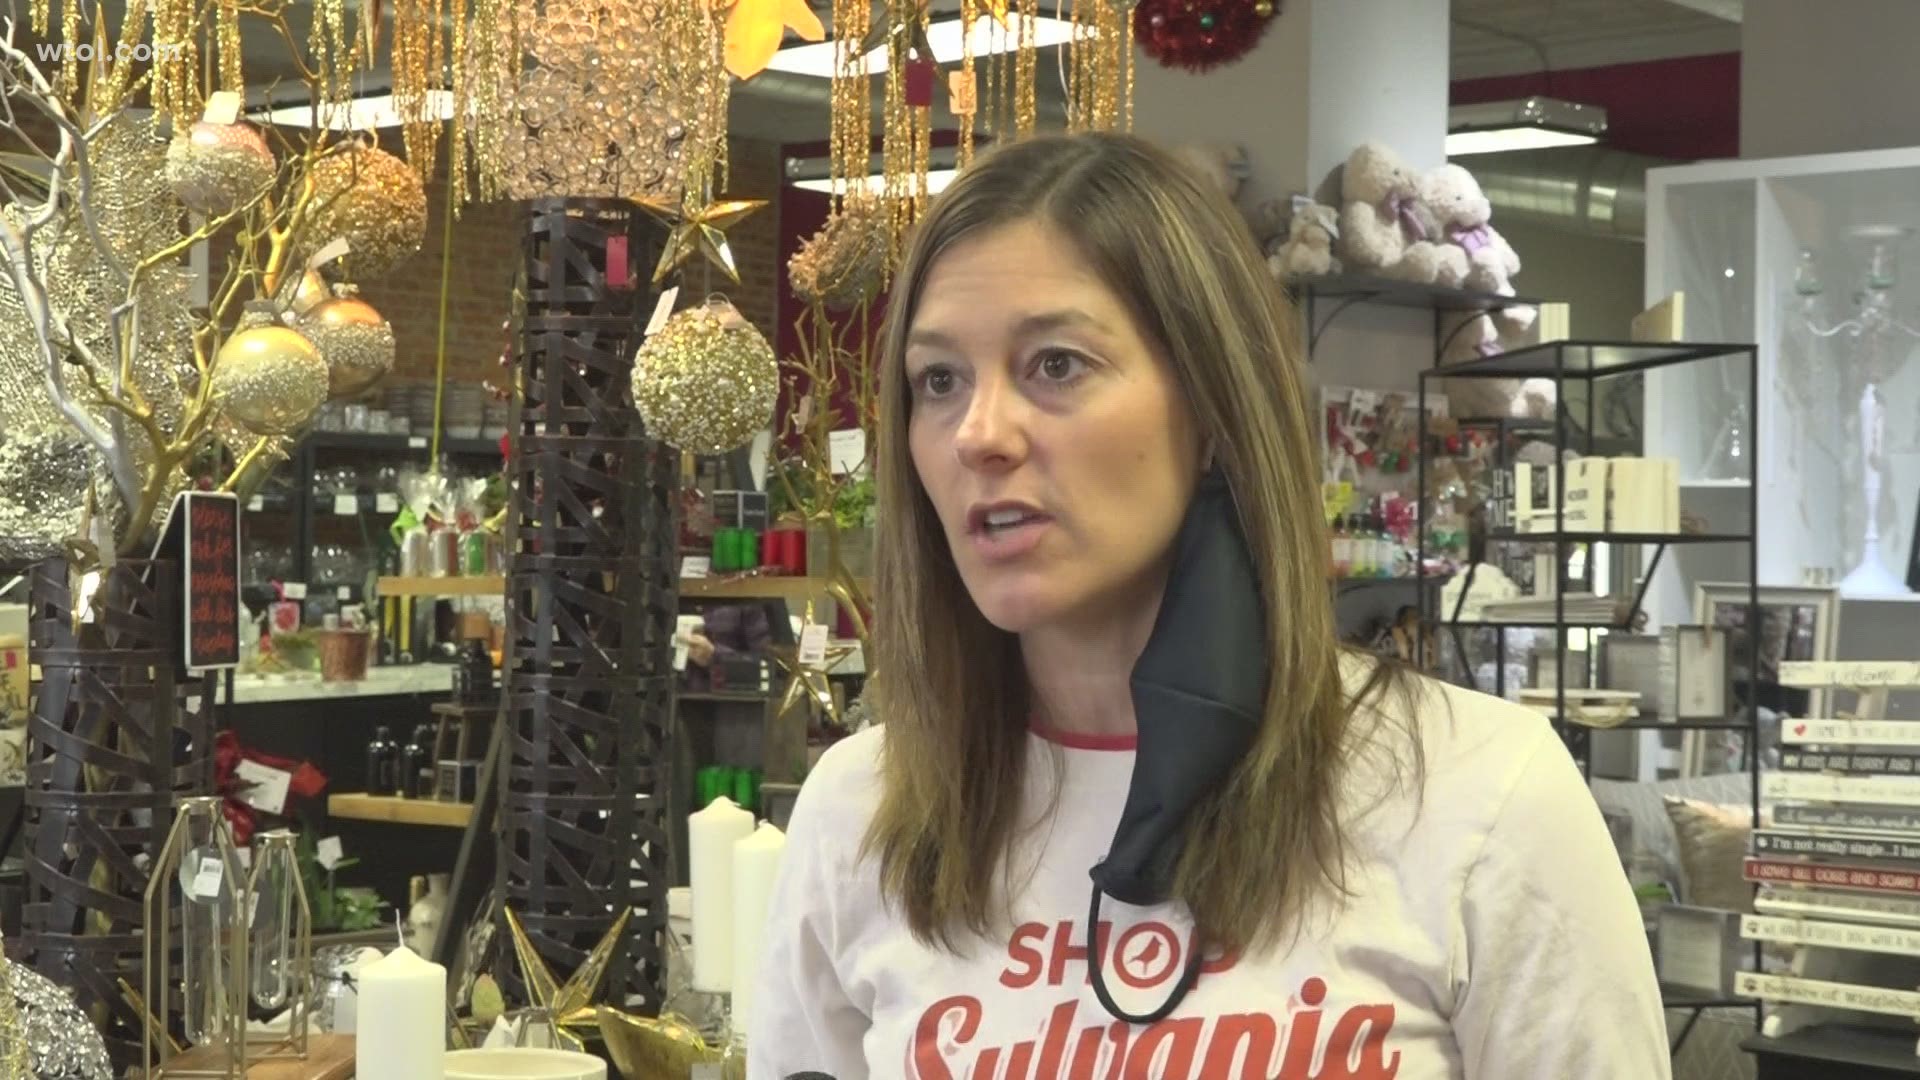 Store owners still had a lot of business despite the circumstances for Black Friday this year.